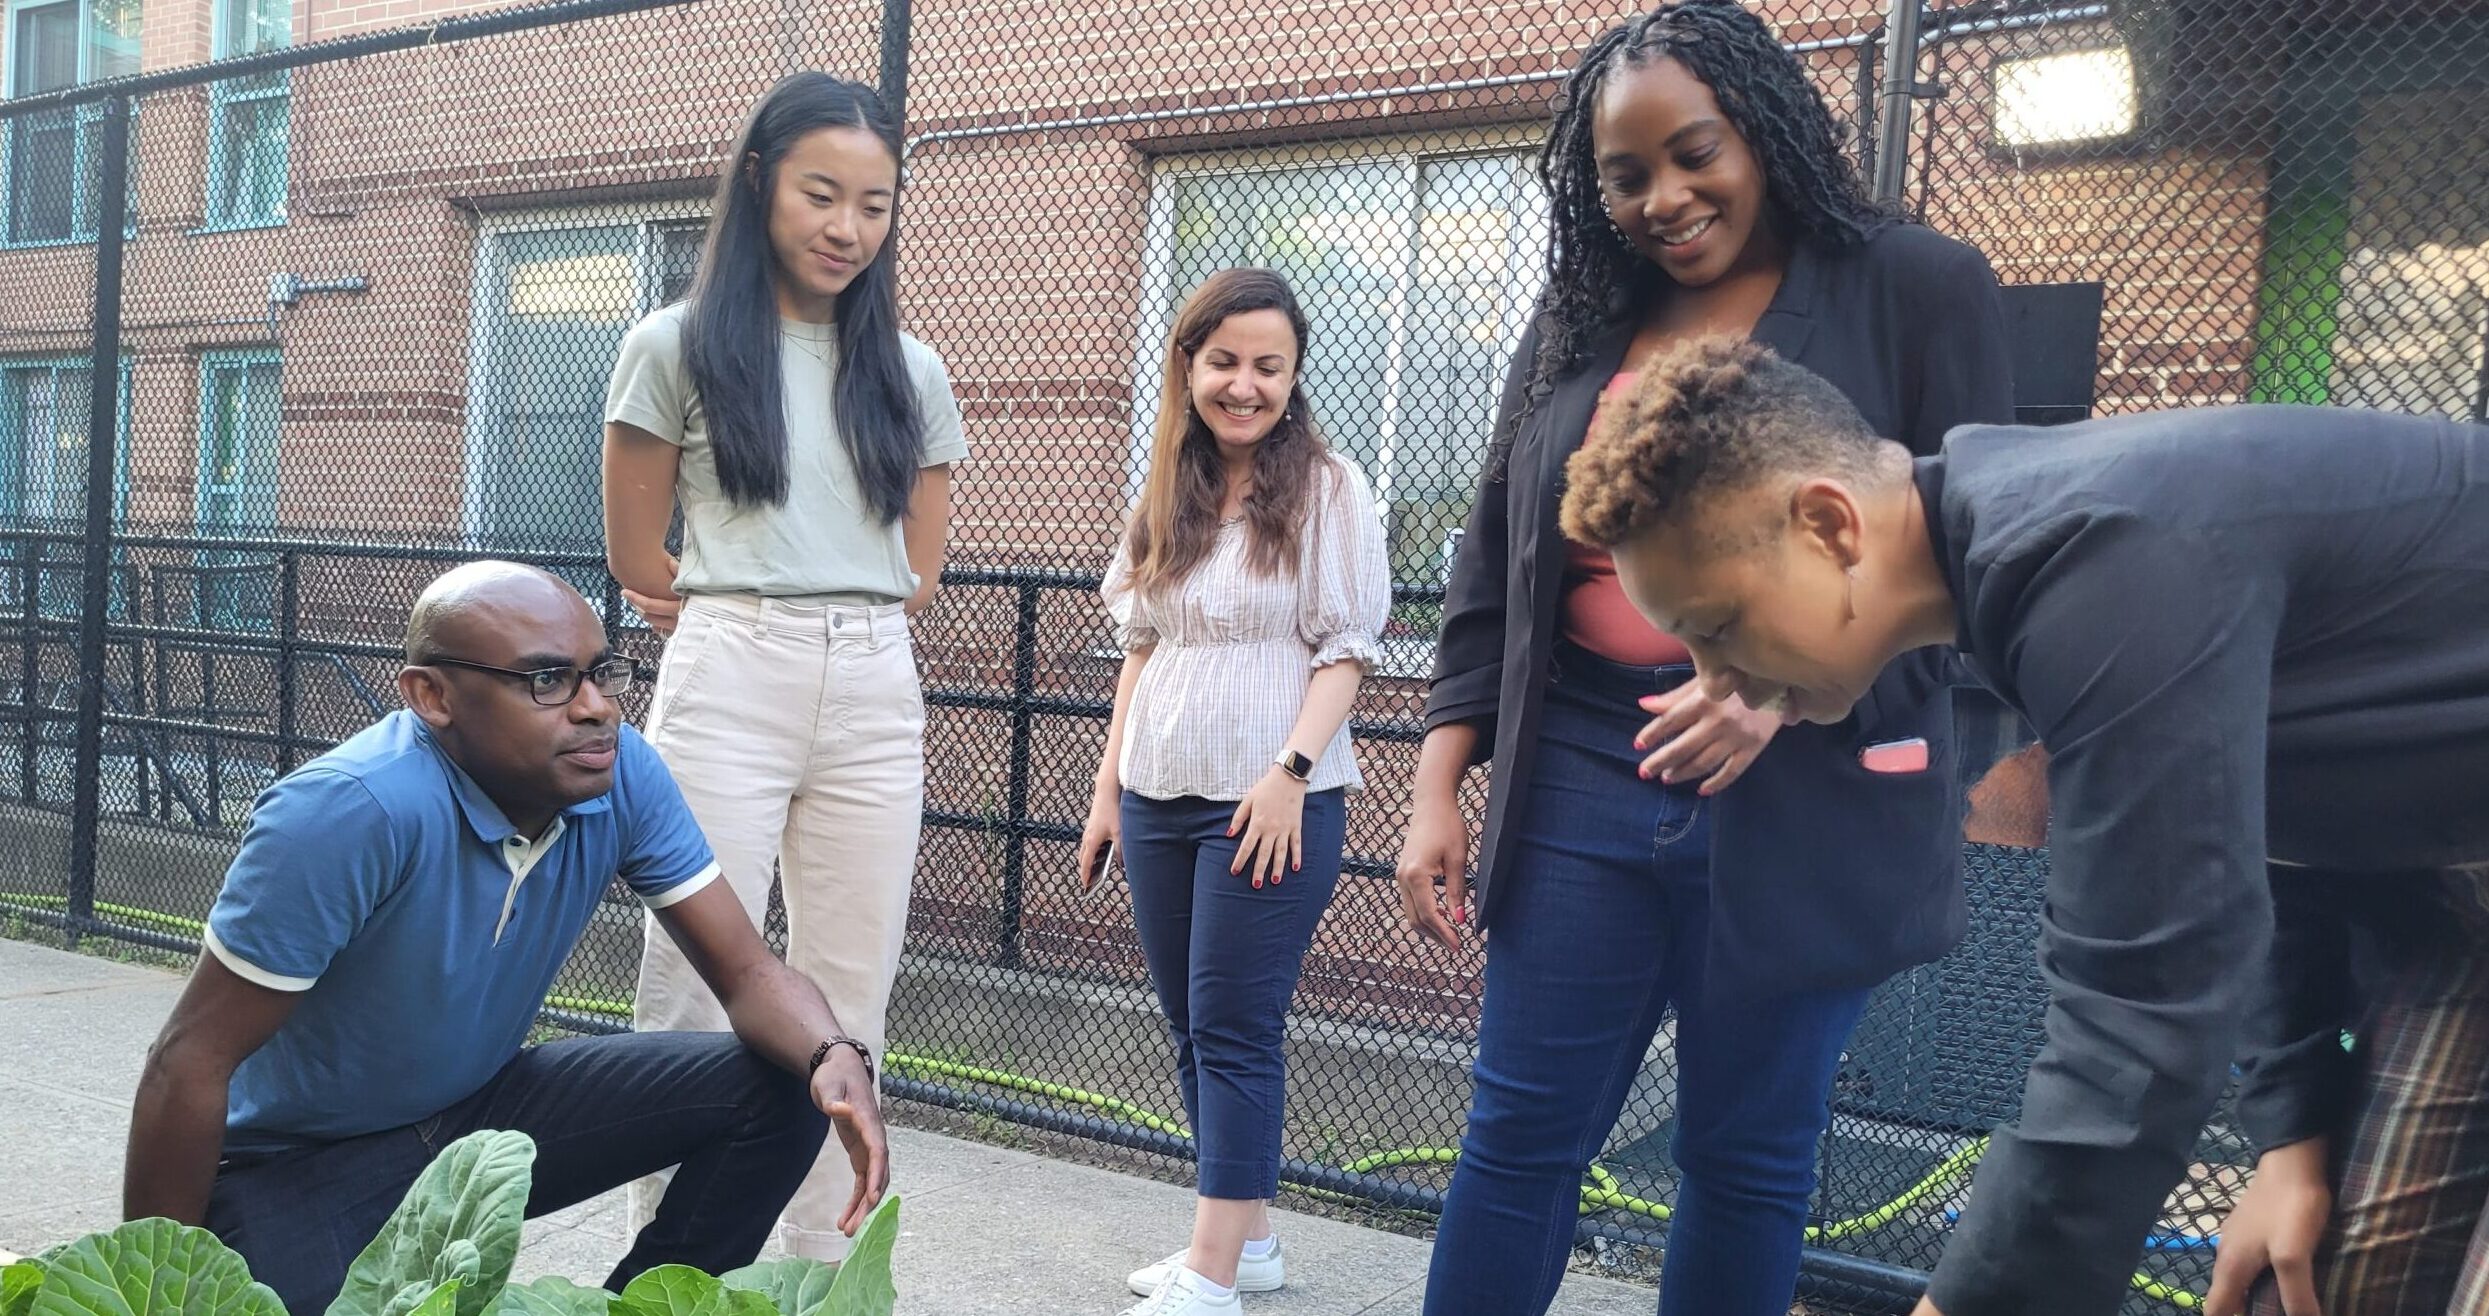 Students work with NYC communities during summer fellowship